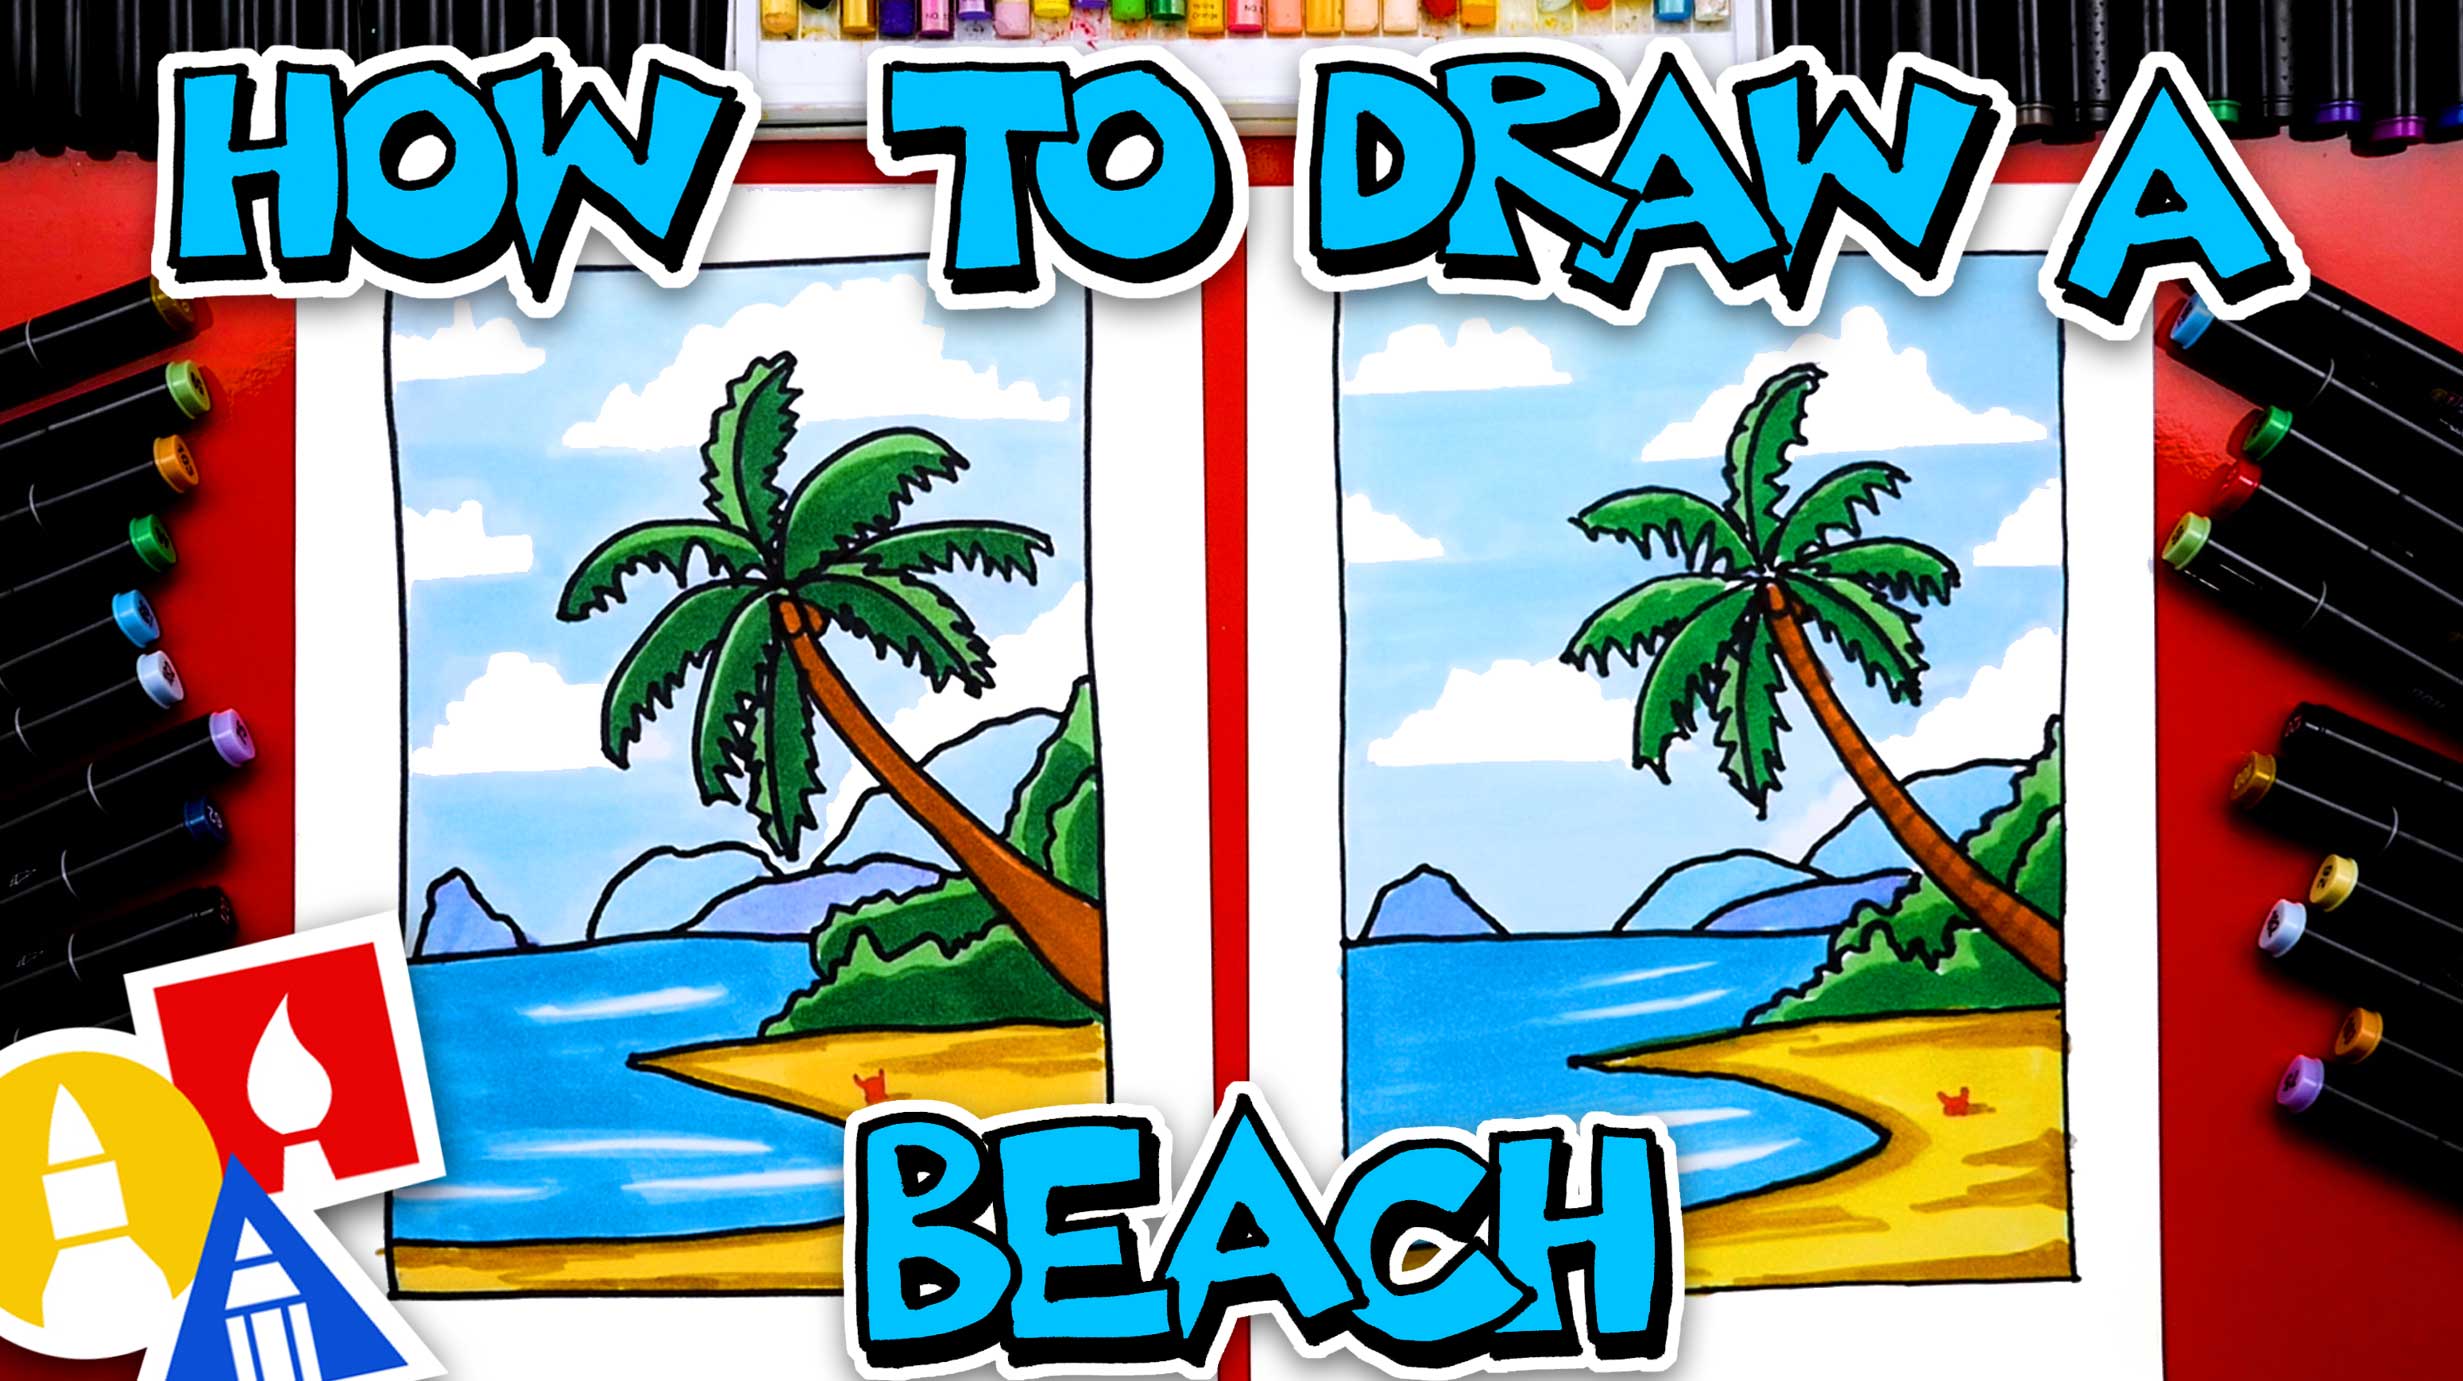 Paradise Beach drawing free image download